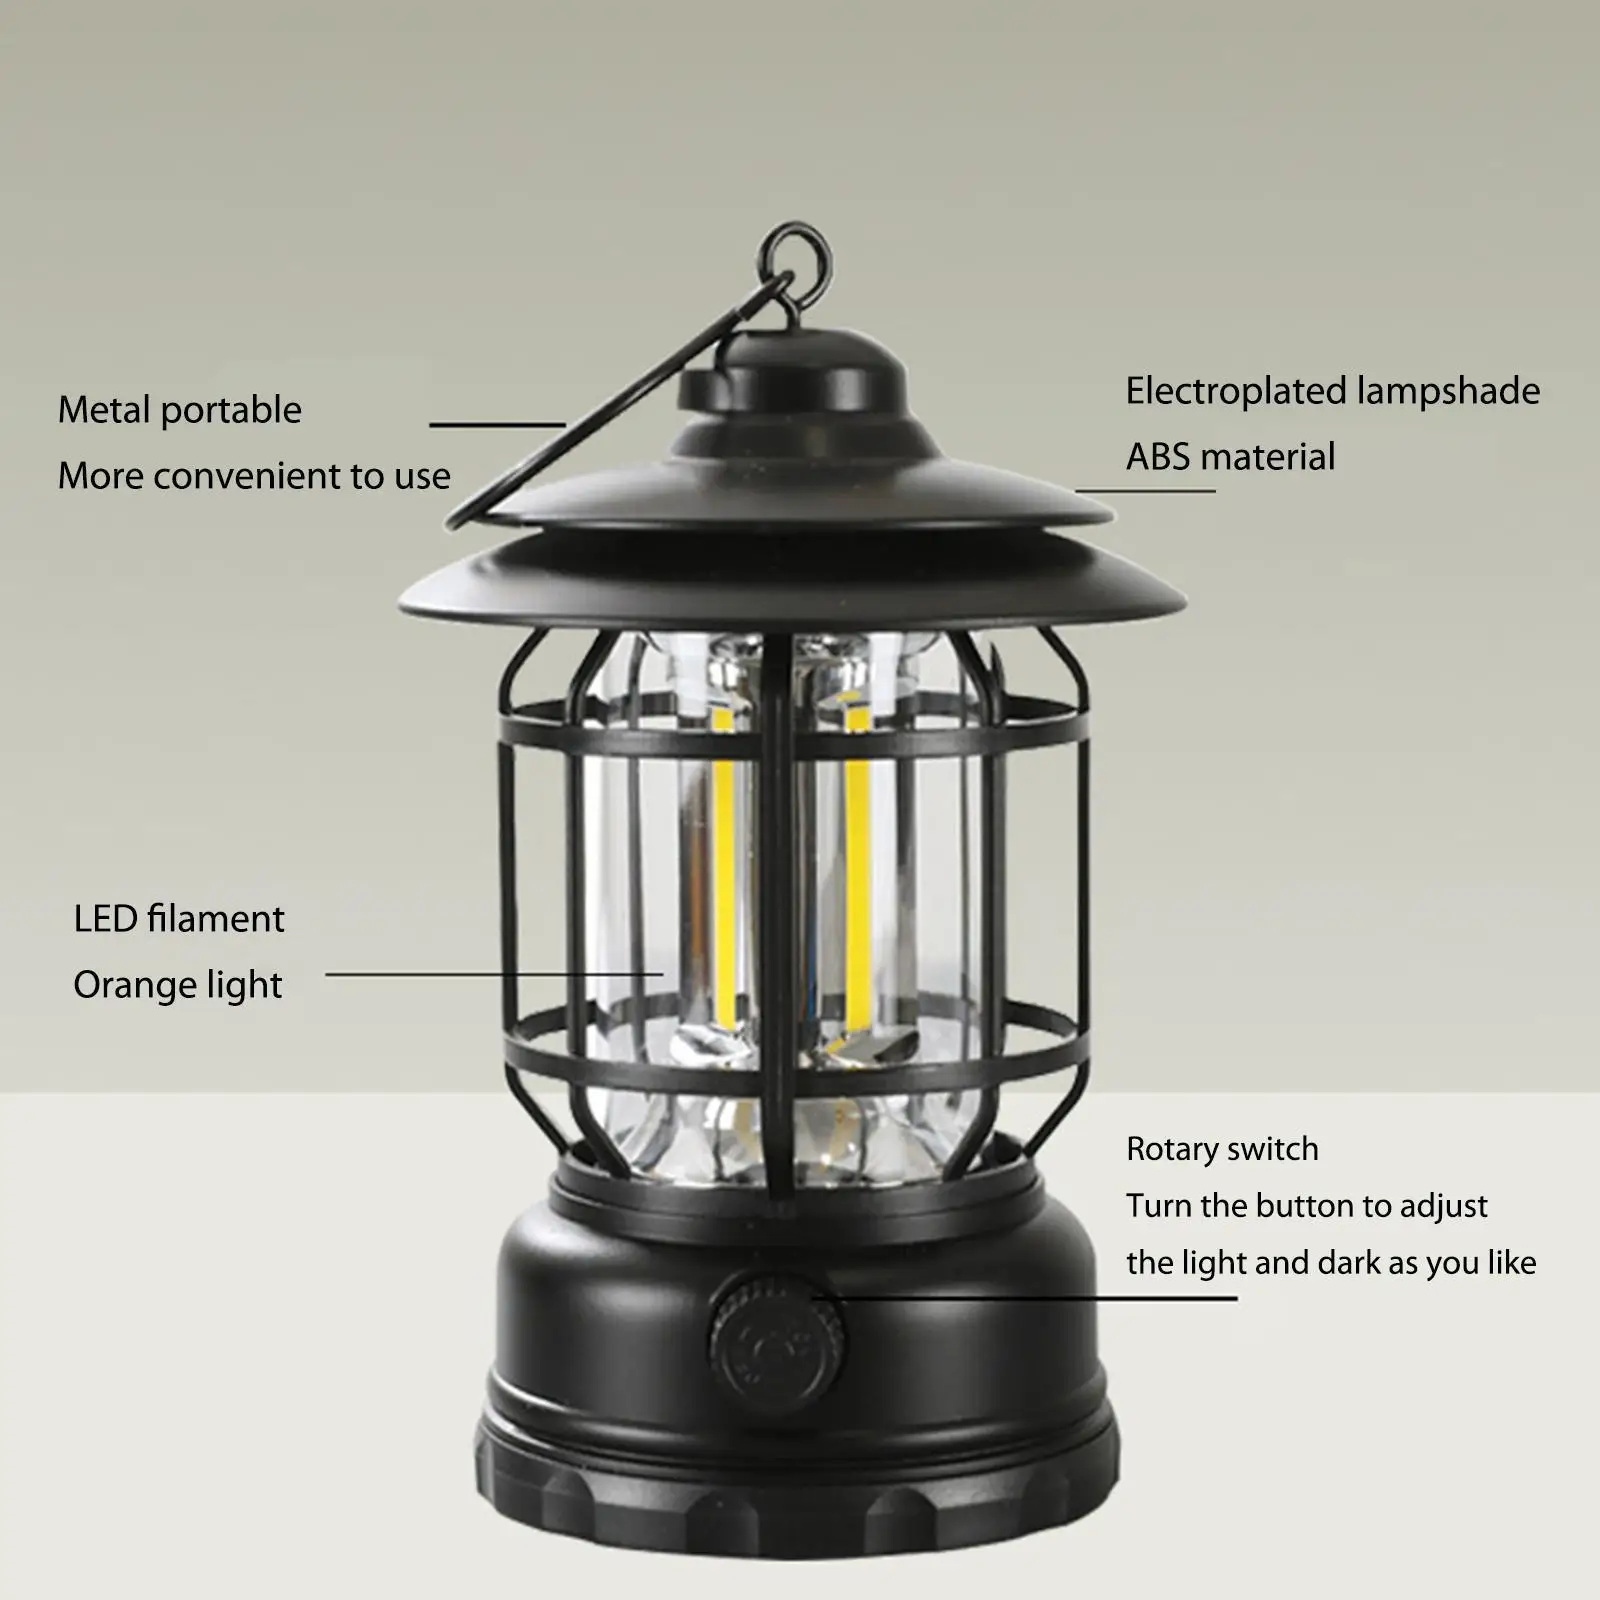 

Retro Portable Camping Lantern Bluetooth-compatible Speaker 300LM 1200mAh Travel Tents Lamps IPX4 Waterproof for Hiking Climbing